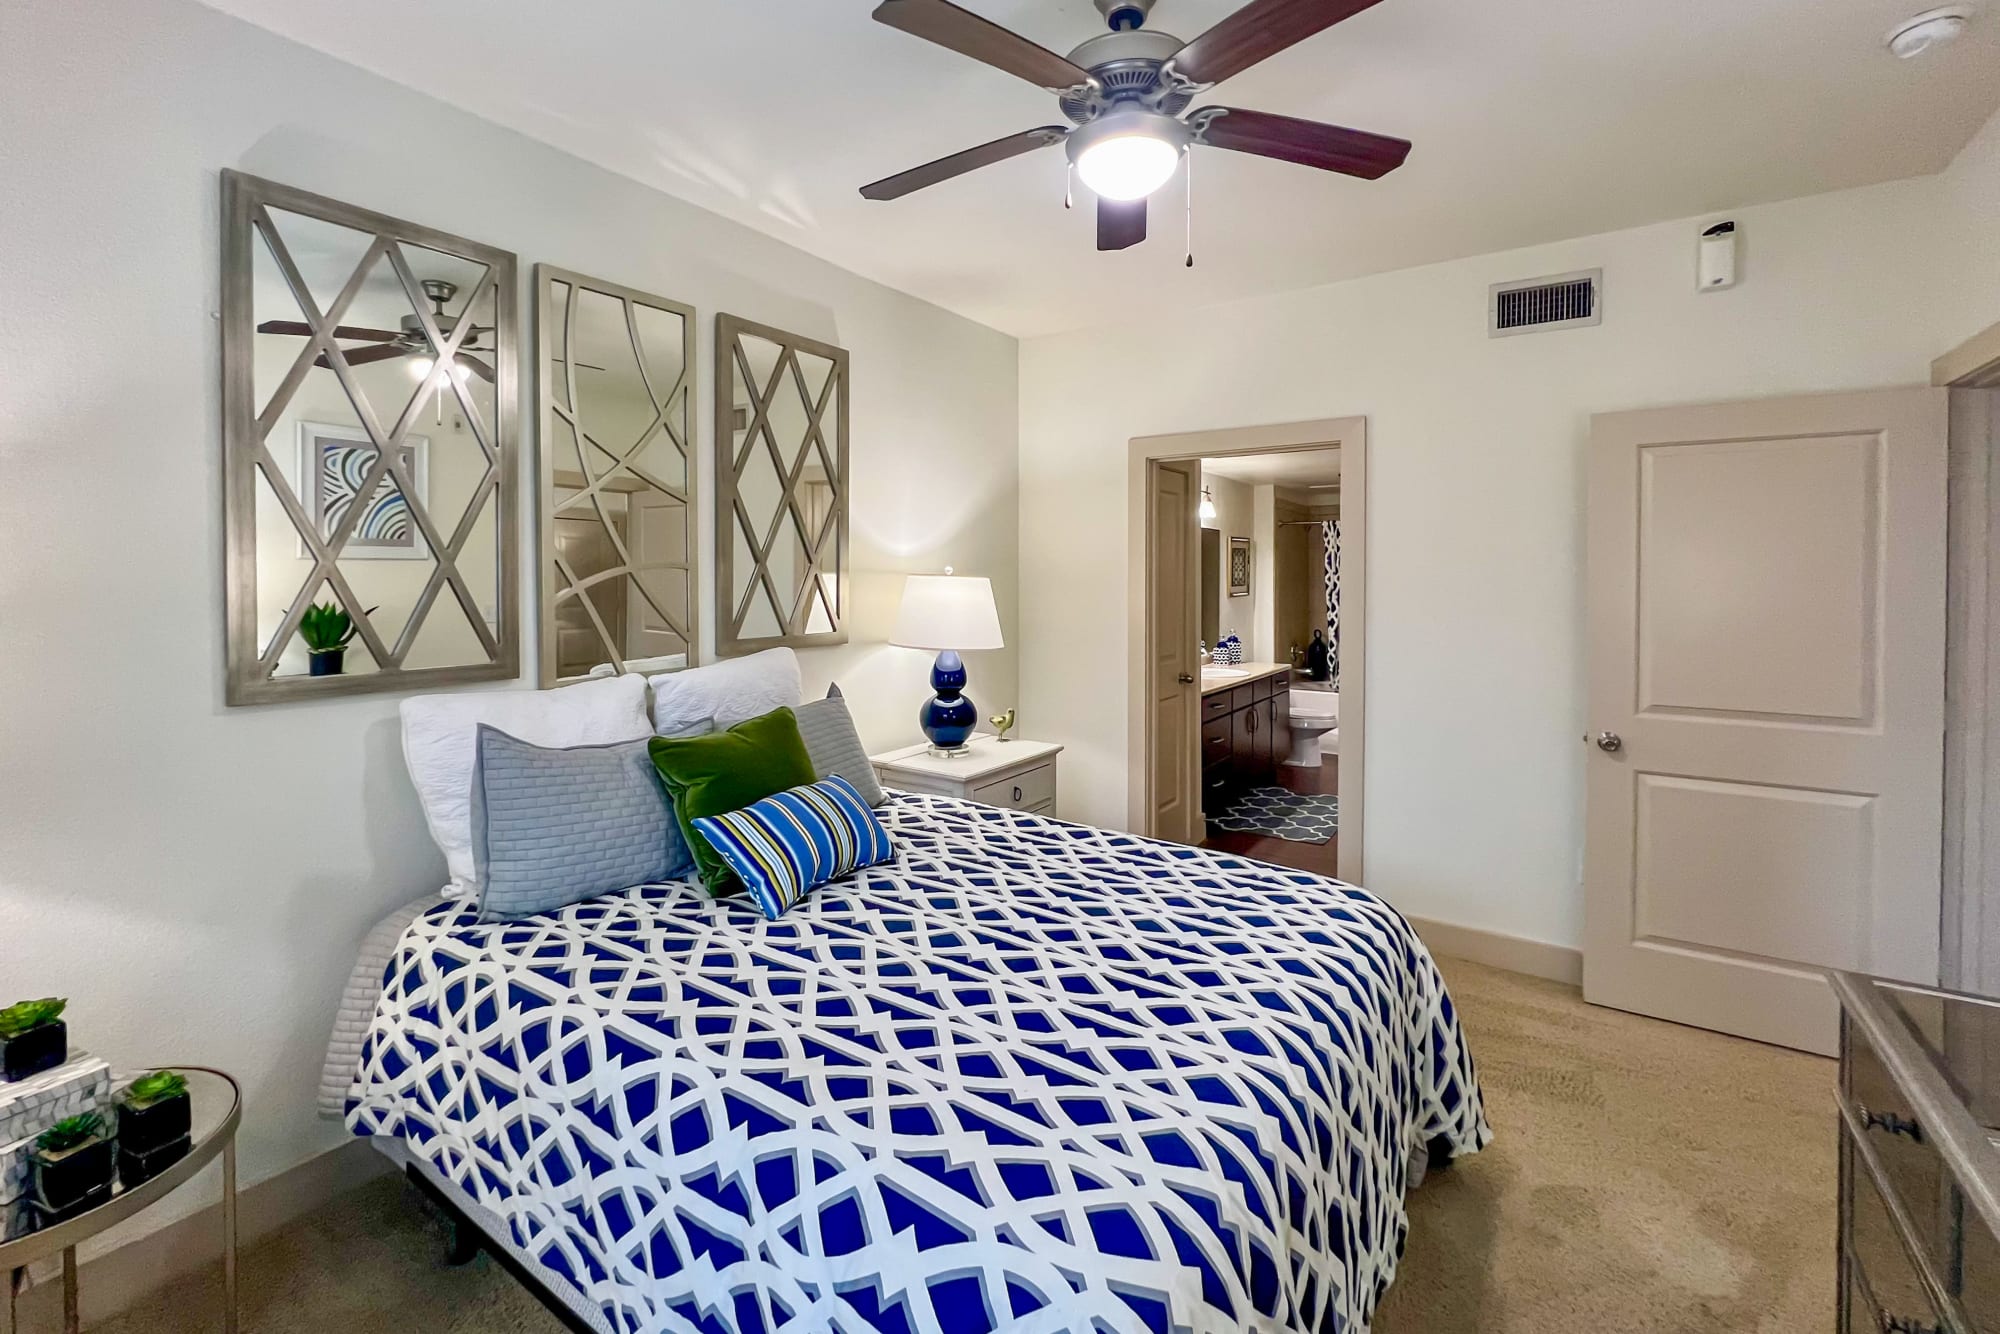 A spacious bedroom at Broadstone Grand Avenue in Pflugerville, Texas